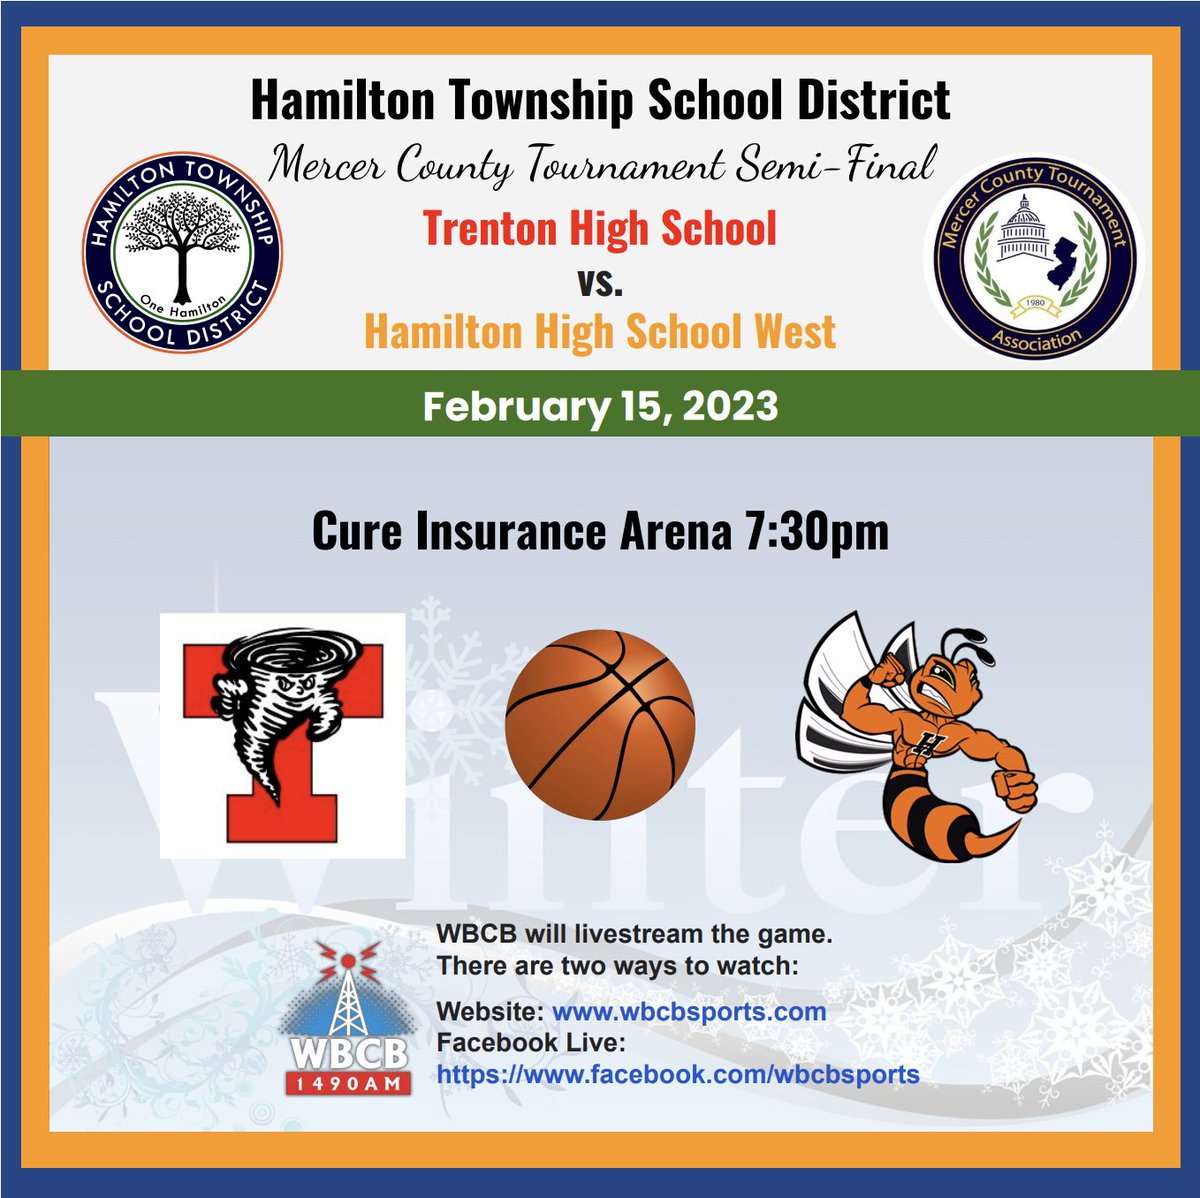 📣 TODAY in Hamilton! Mercer County Tournament Semi-Final Event 🏀 @WBCB_Sports Live Stream begins 7:20pm Game Time: 7:30pm Trenton Central HS vs. @HTSD_West Good luck, Hornets! 🐝 #HTSD #HTSDPride @ScottRRocco @HTSDSecondary @HHW_Athletics @WestVP_Flanagan @LauraGeltch